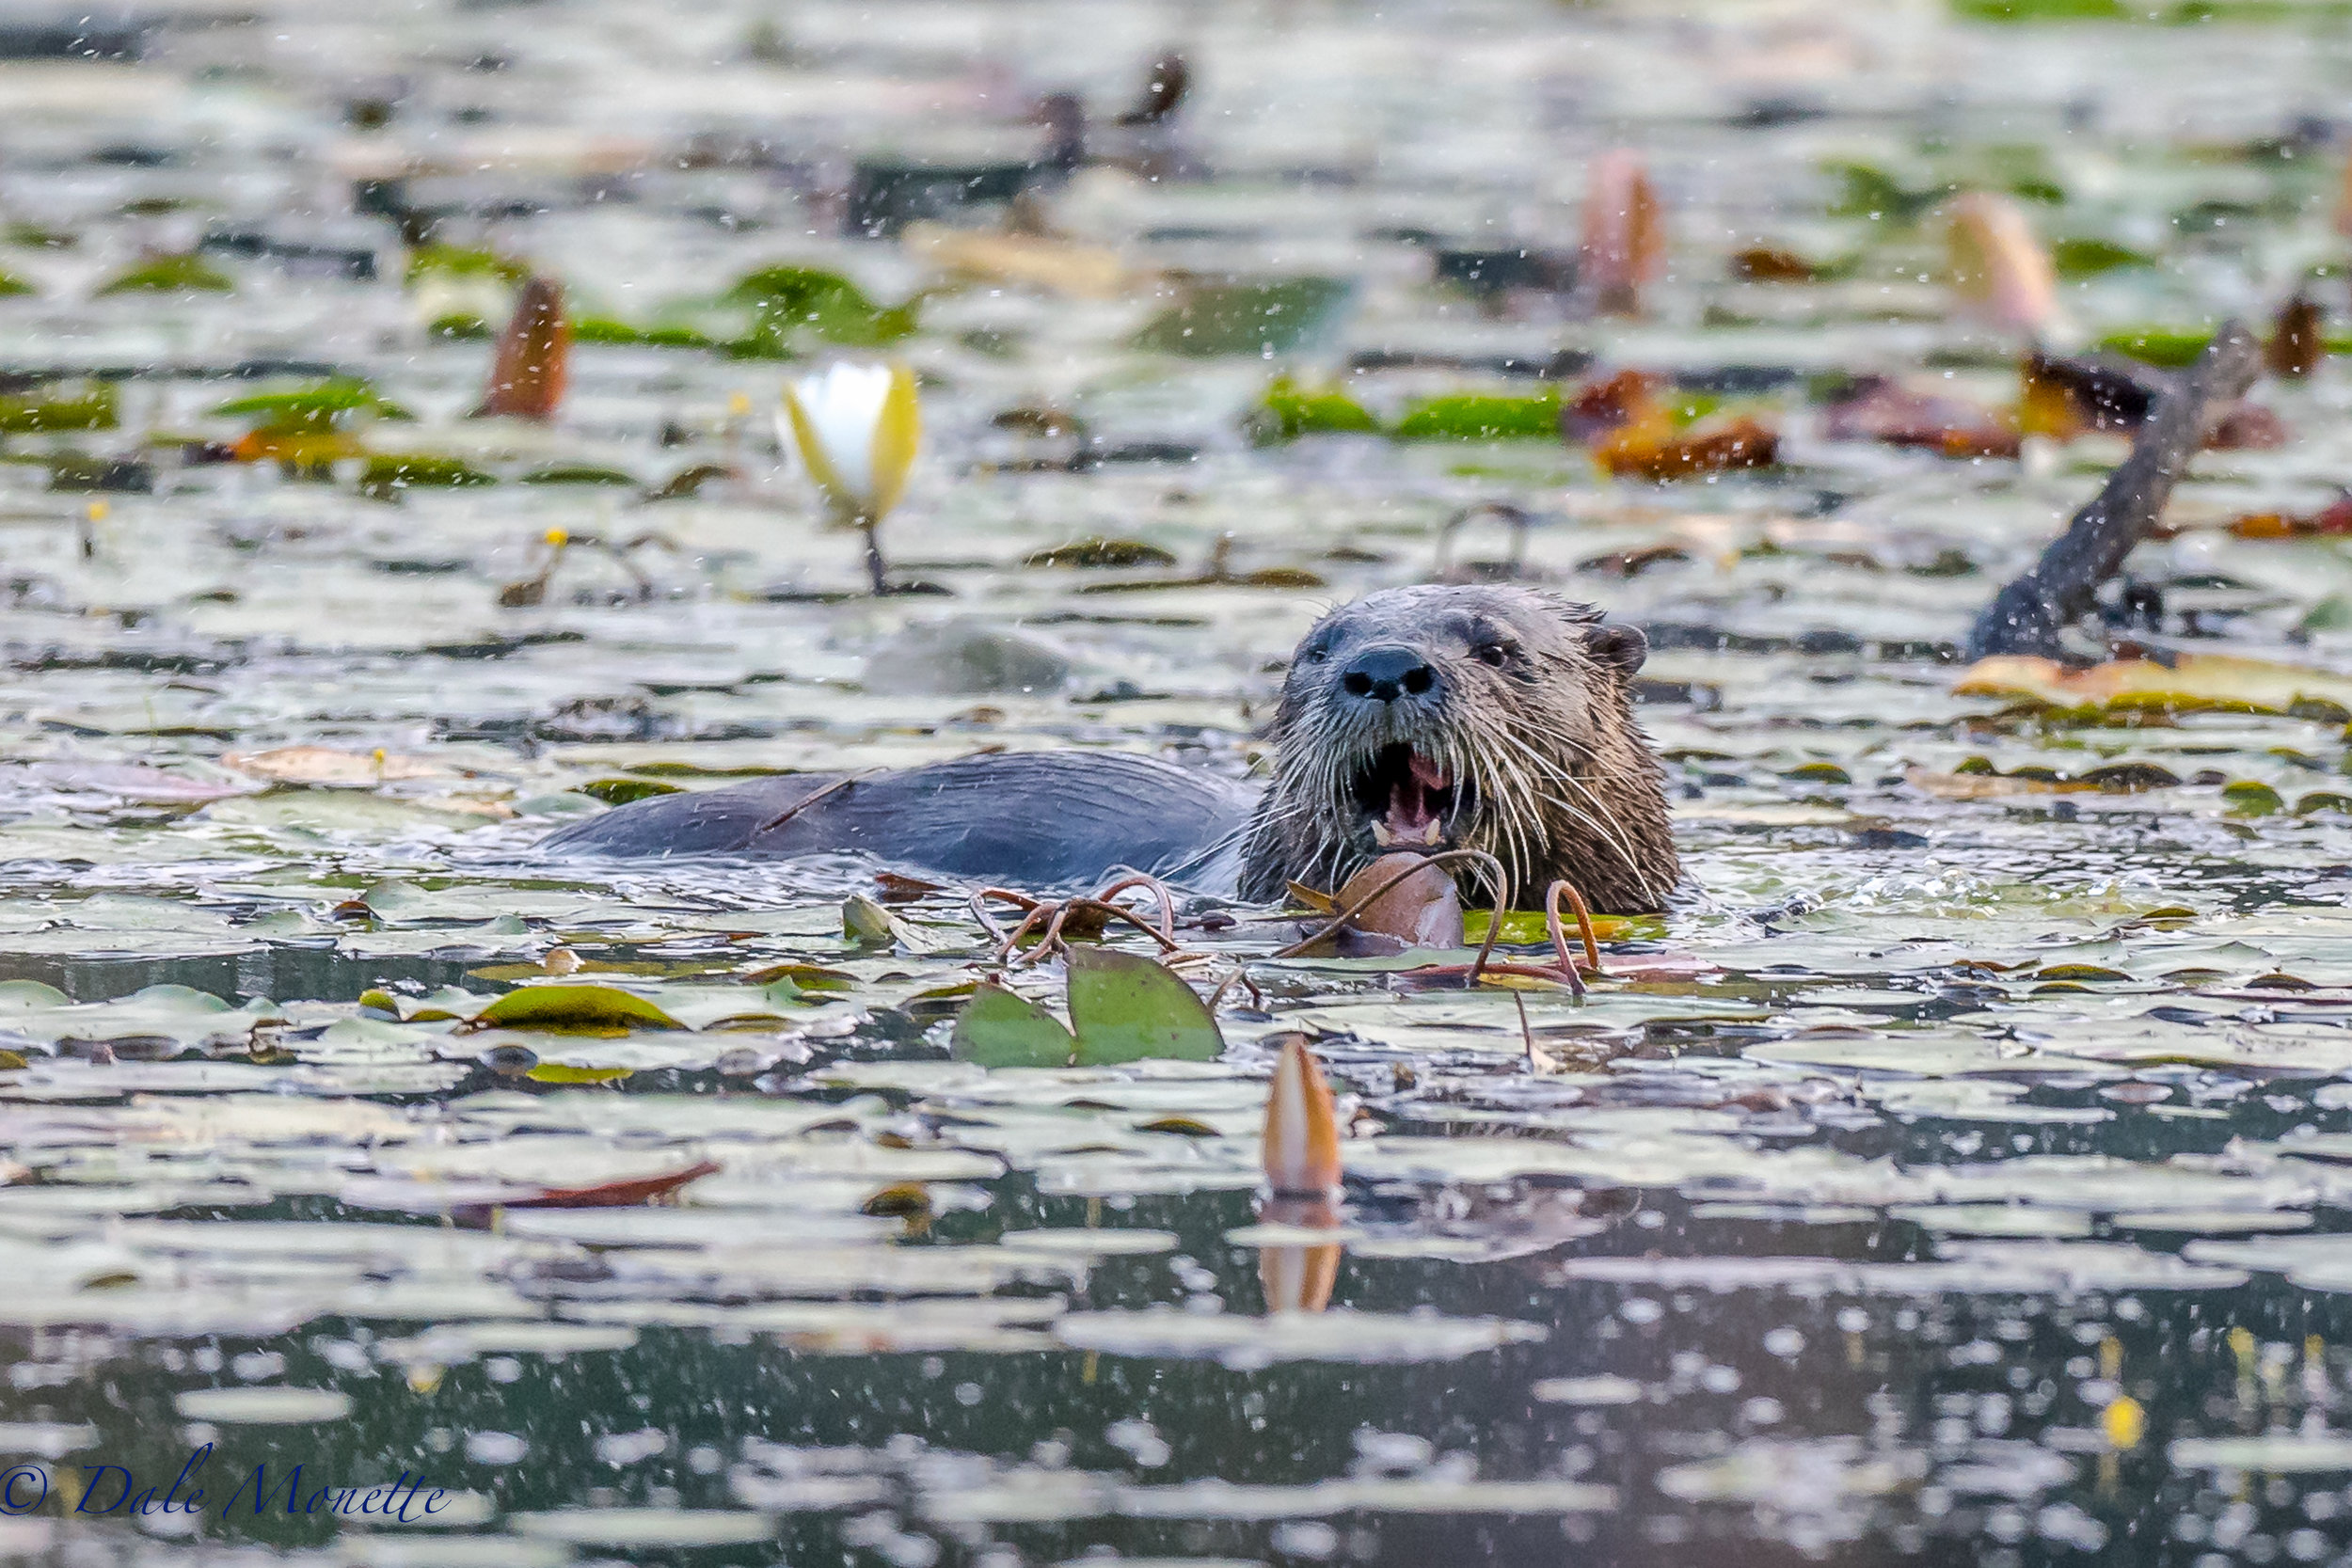   This river otter shows up every day at the same time through the same part of the pond, The breakfast menu today was frogs !,,,,,, &nbsp;8/26/17  